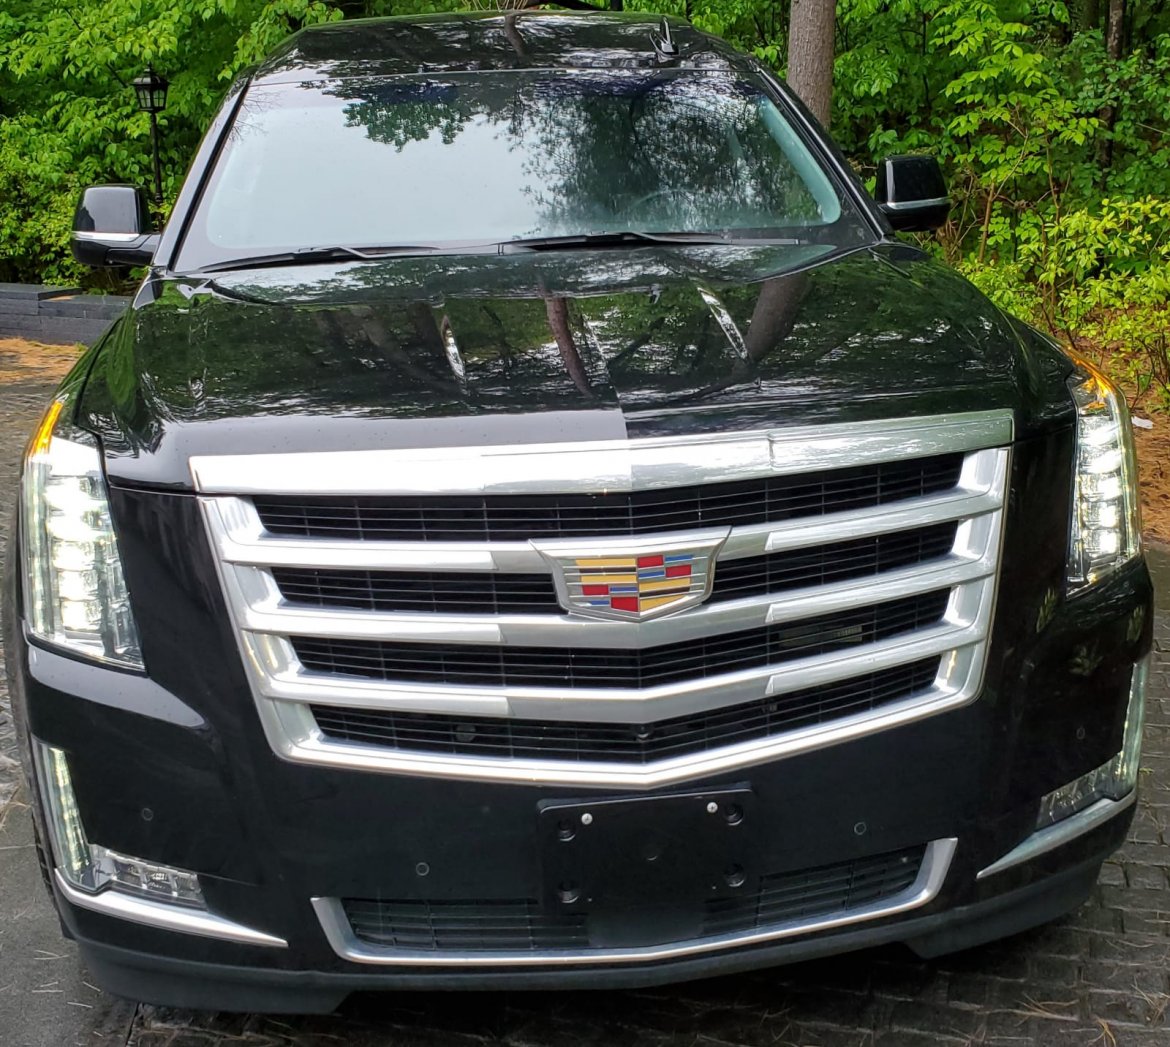 CEO SUV Mobile Office for sale: 2019 Cadillac escalade